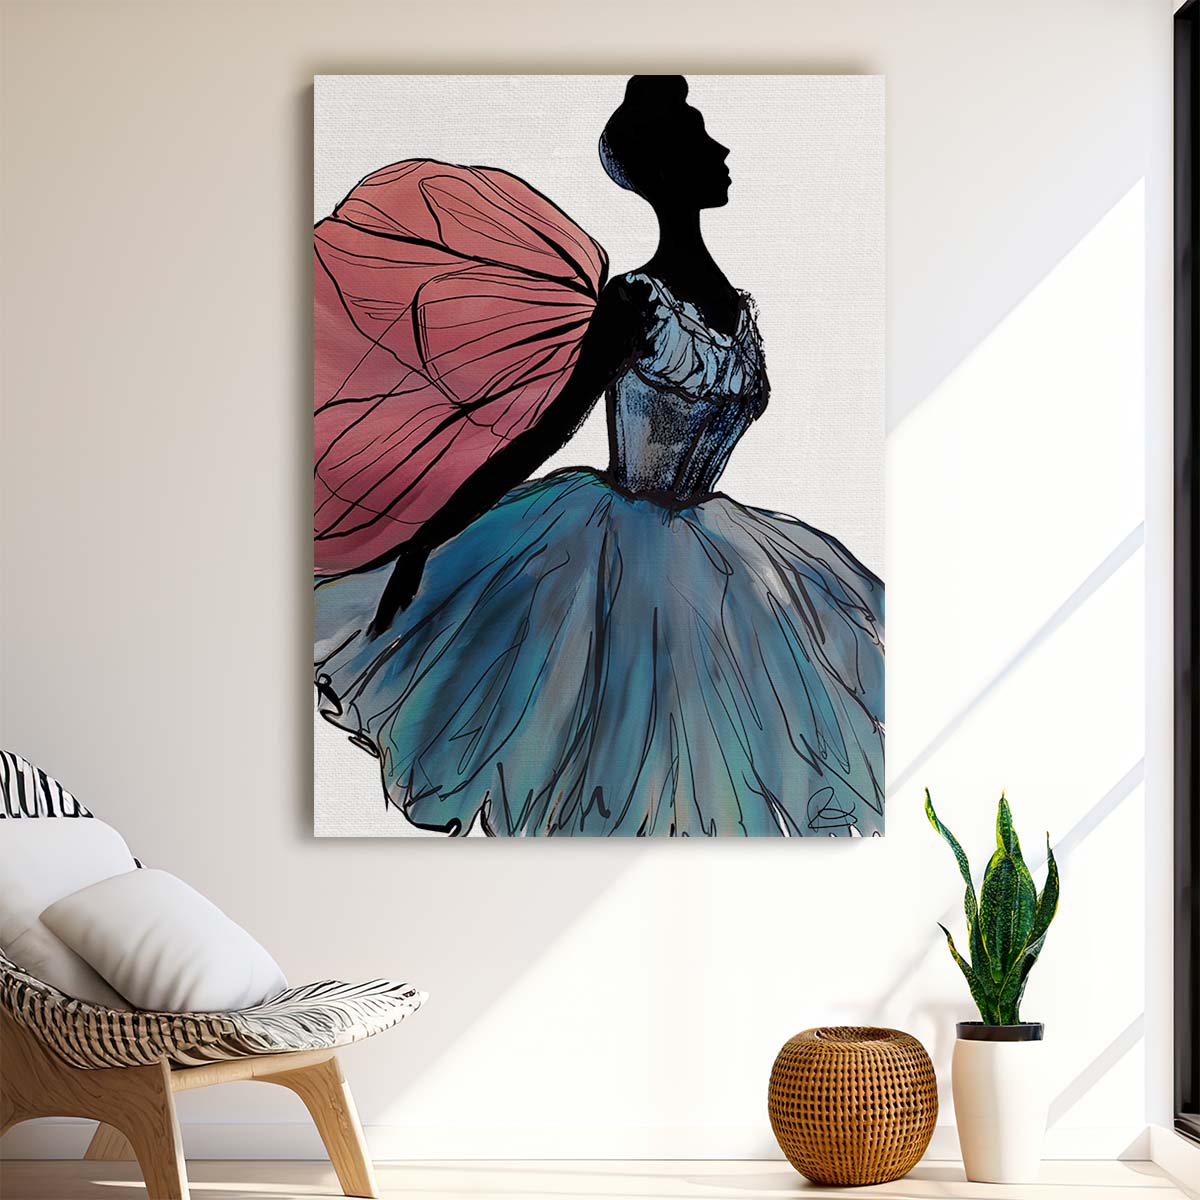 Bright, Illustration of Winged Ballerina Dancer by Ruth Day by Luxuriance Designs, made in USA